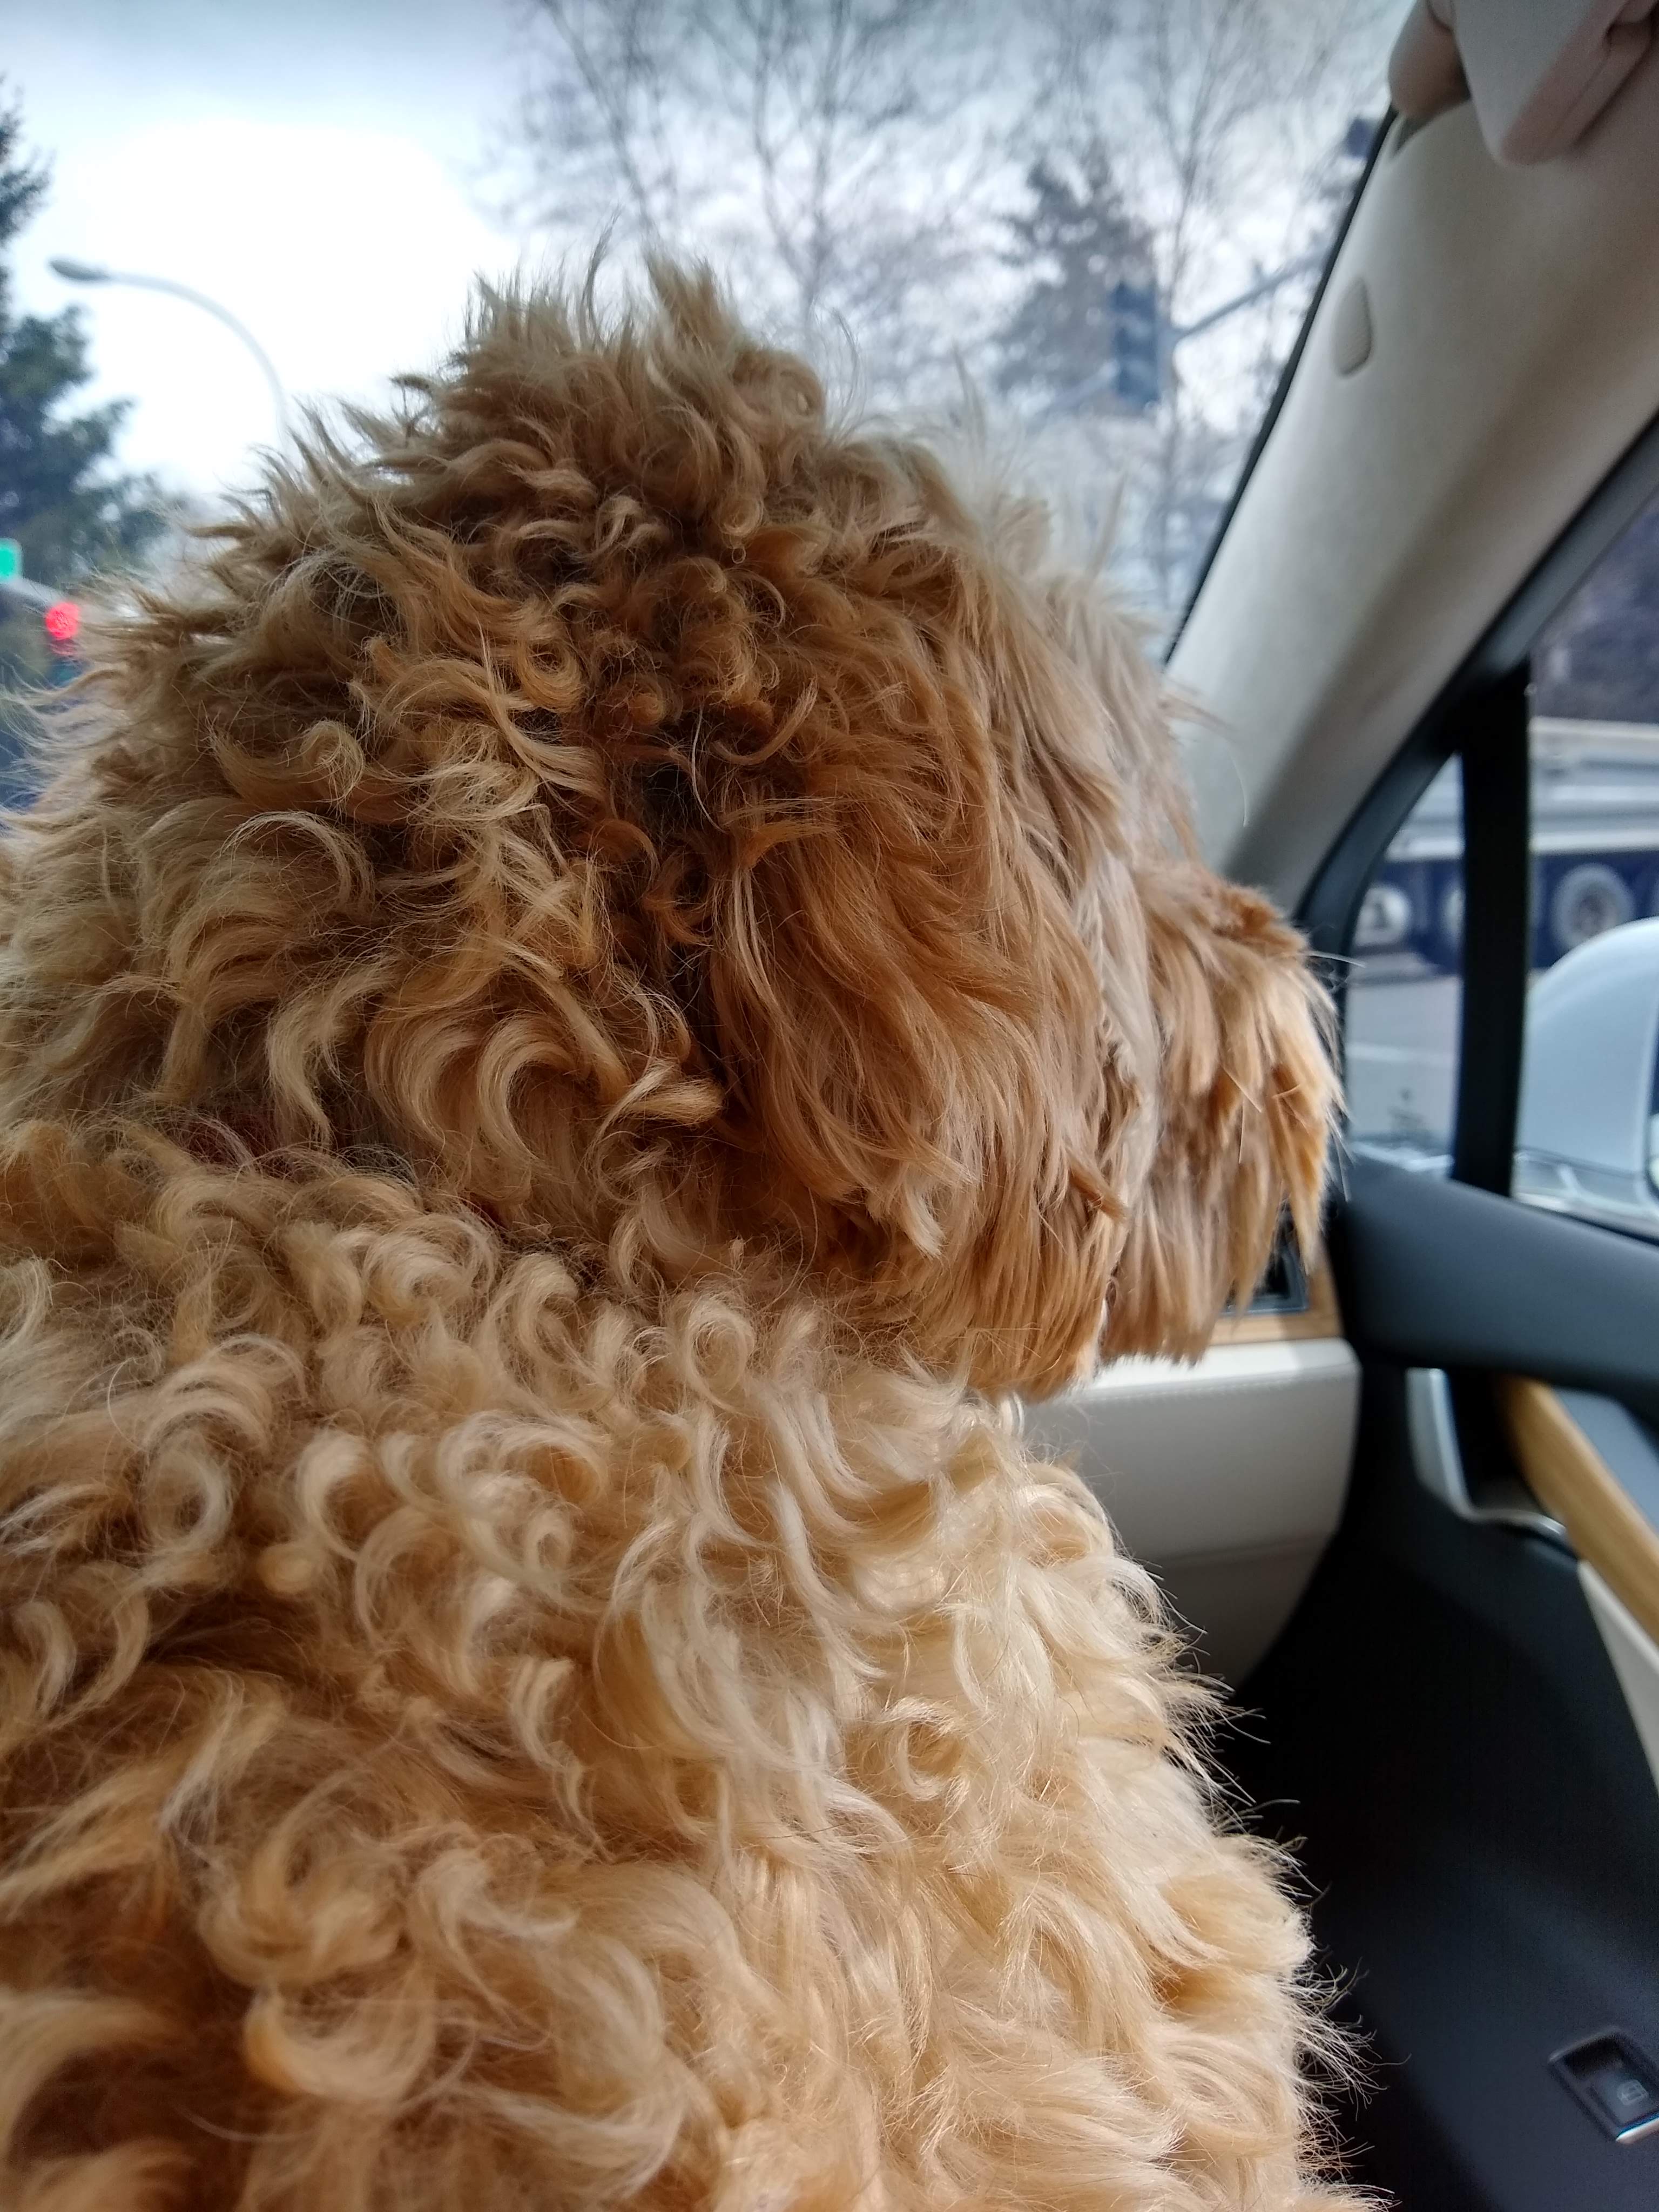 Hachi in a car, from the perspective of the person whose lap he's on.